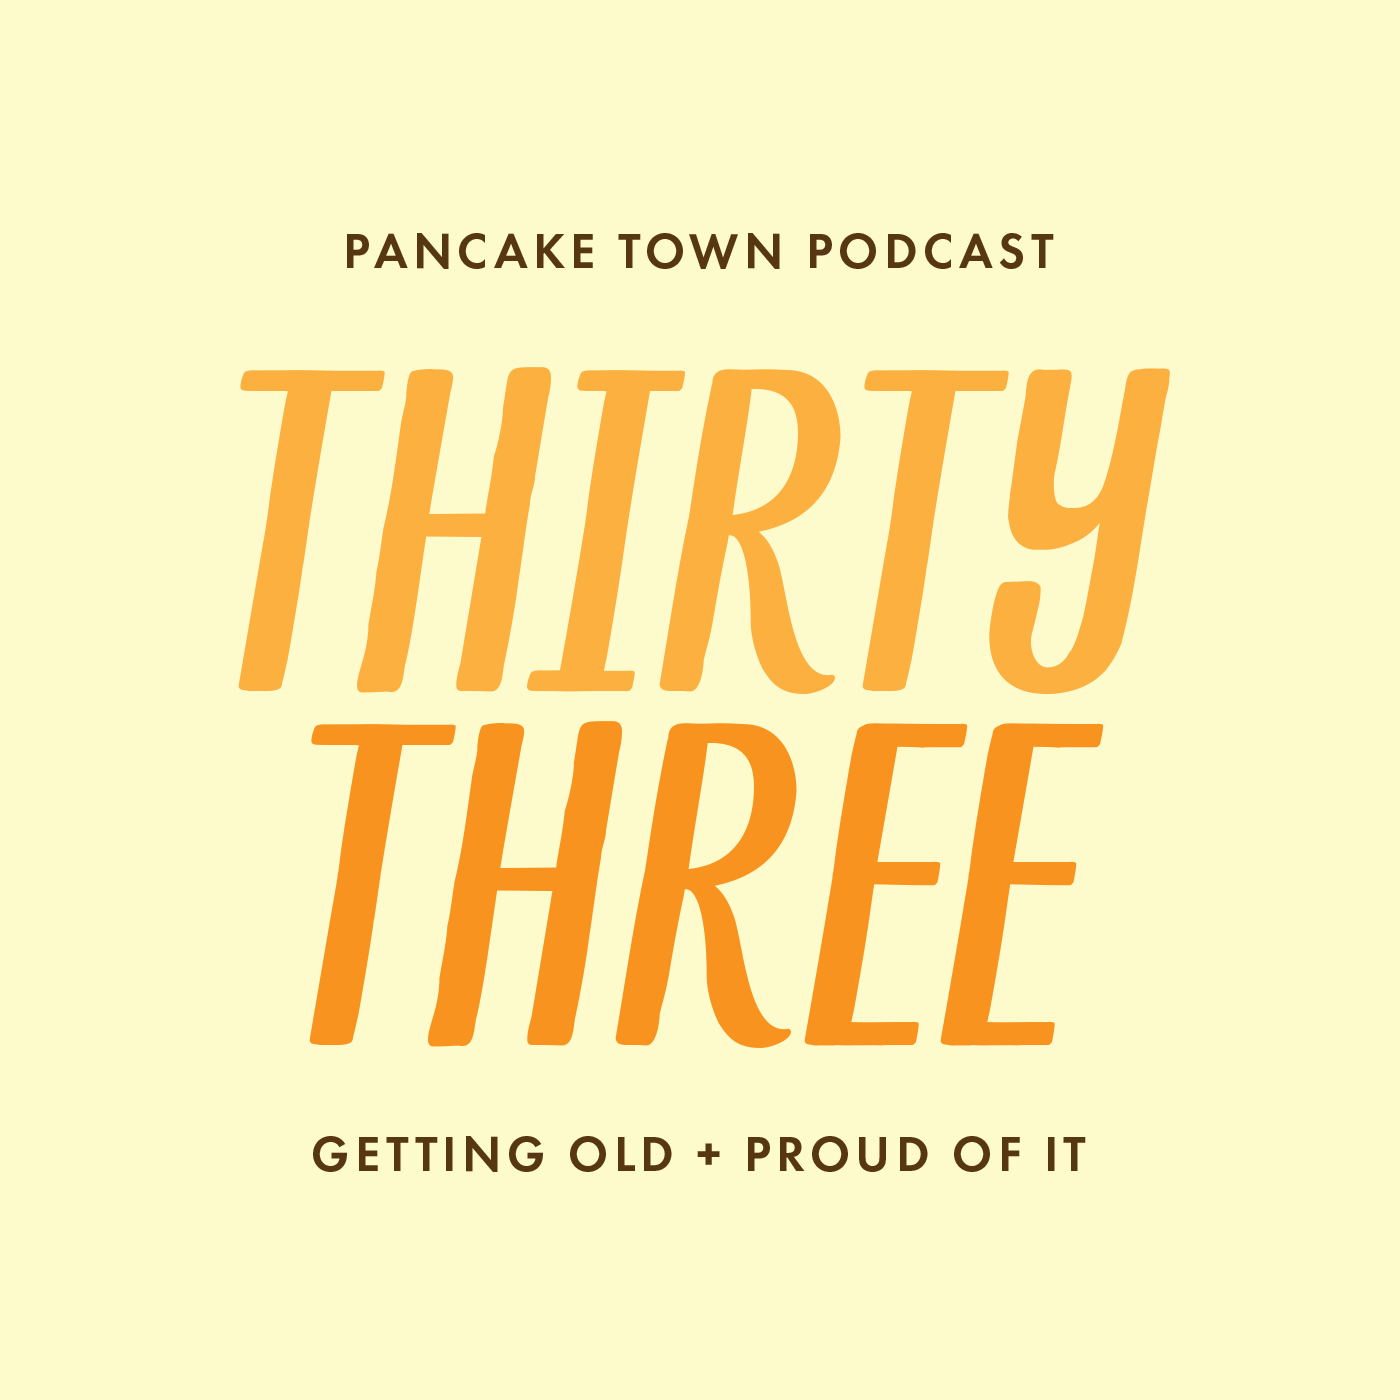 Episode 33 - Getting Old + Proud of It